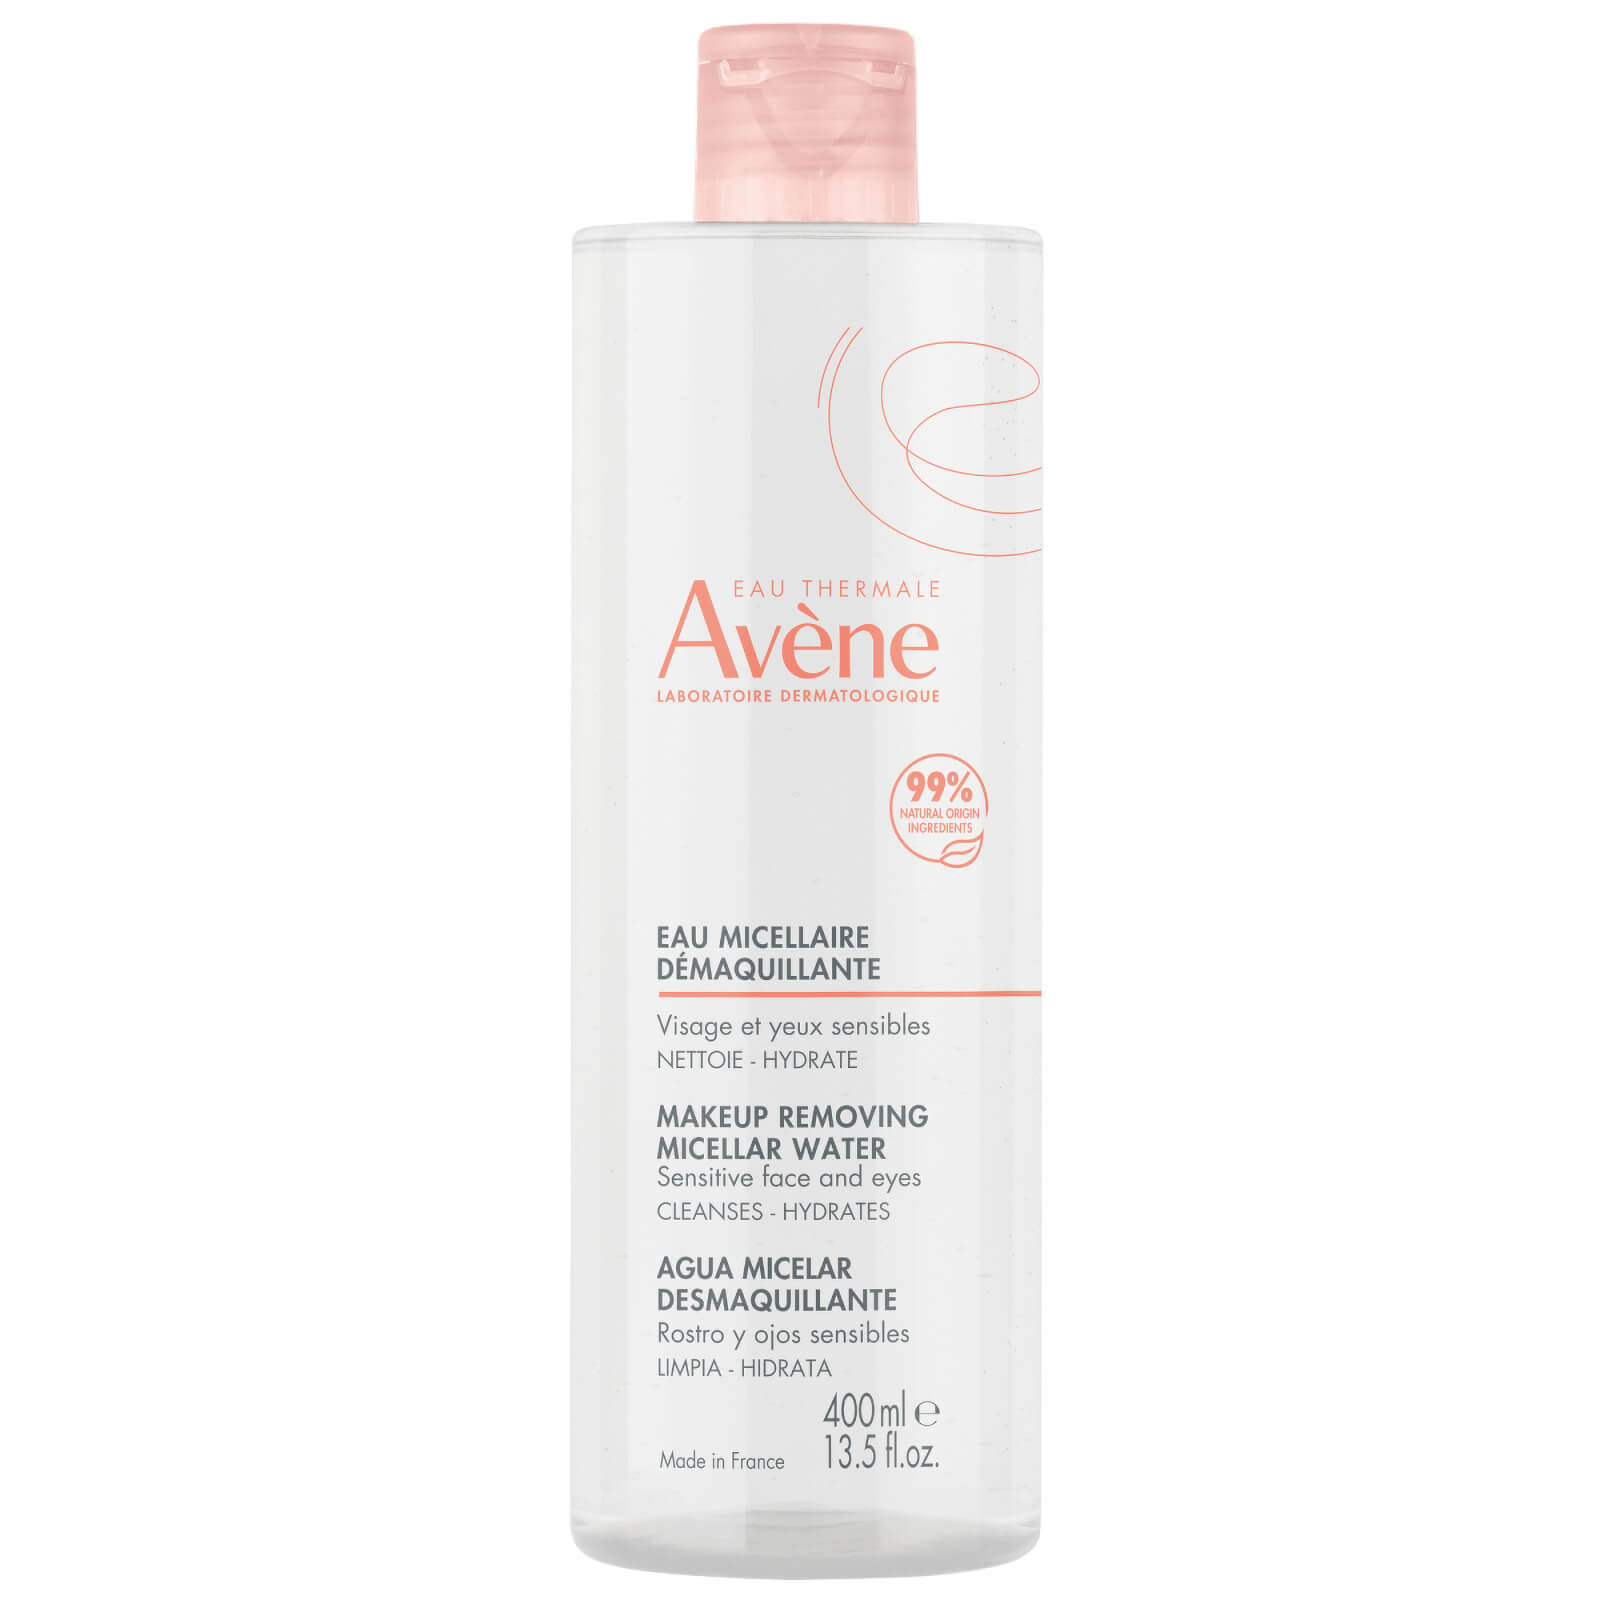 Photos - Facial / Body Cleansing Product Avene Avène Make-Up Removing Micellar Water 400ml 